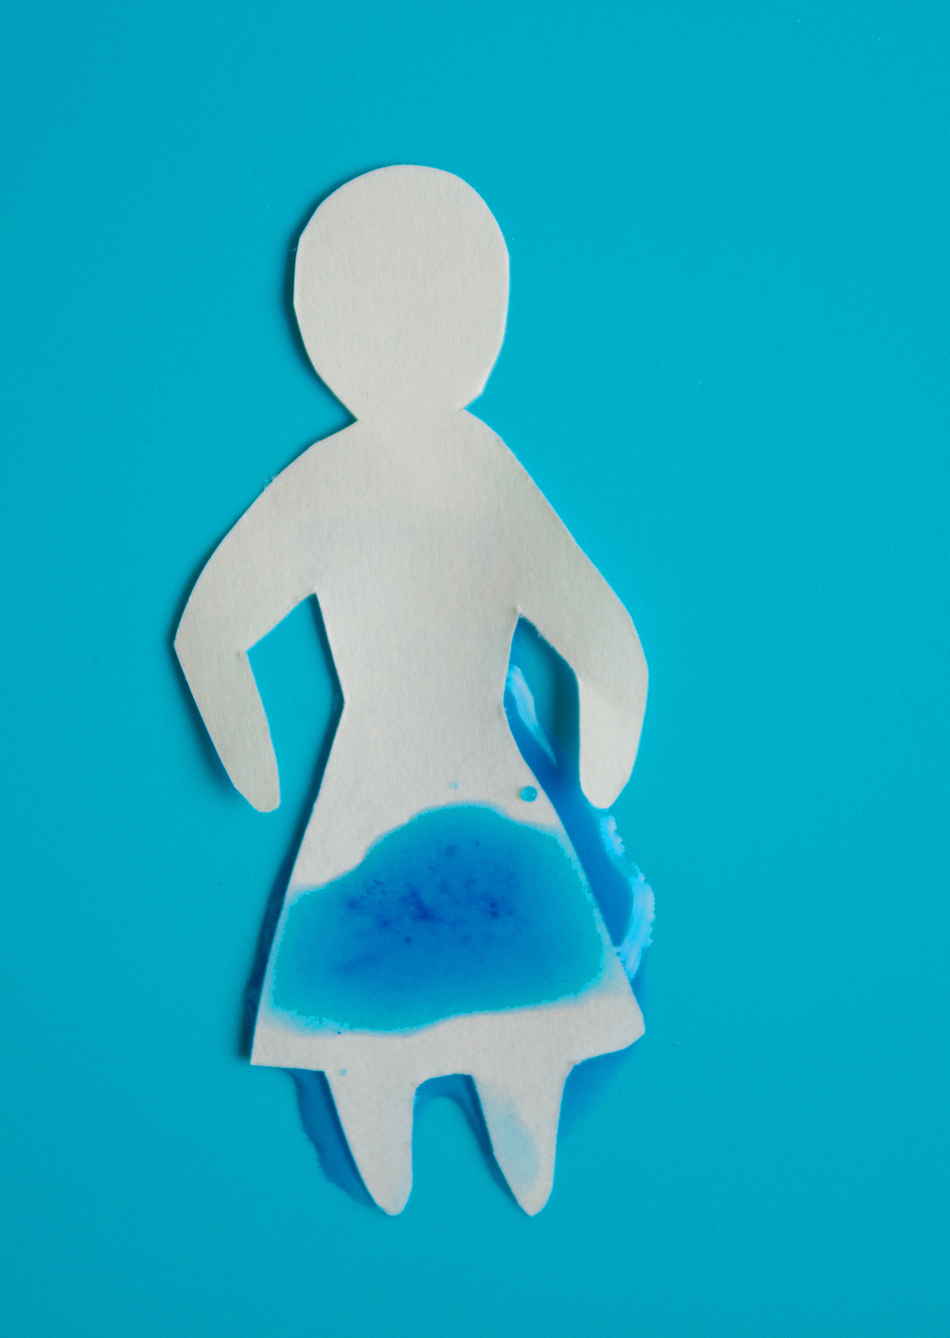 Do You Urinate a Lot? It Might Be Diabetes